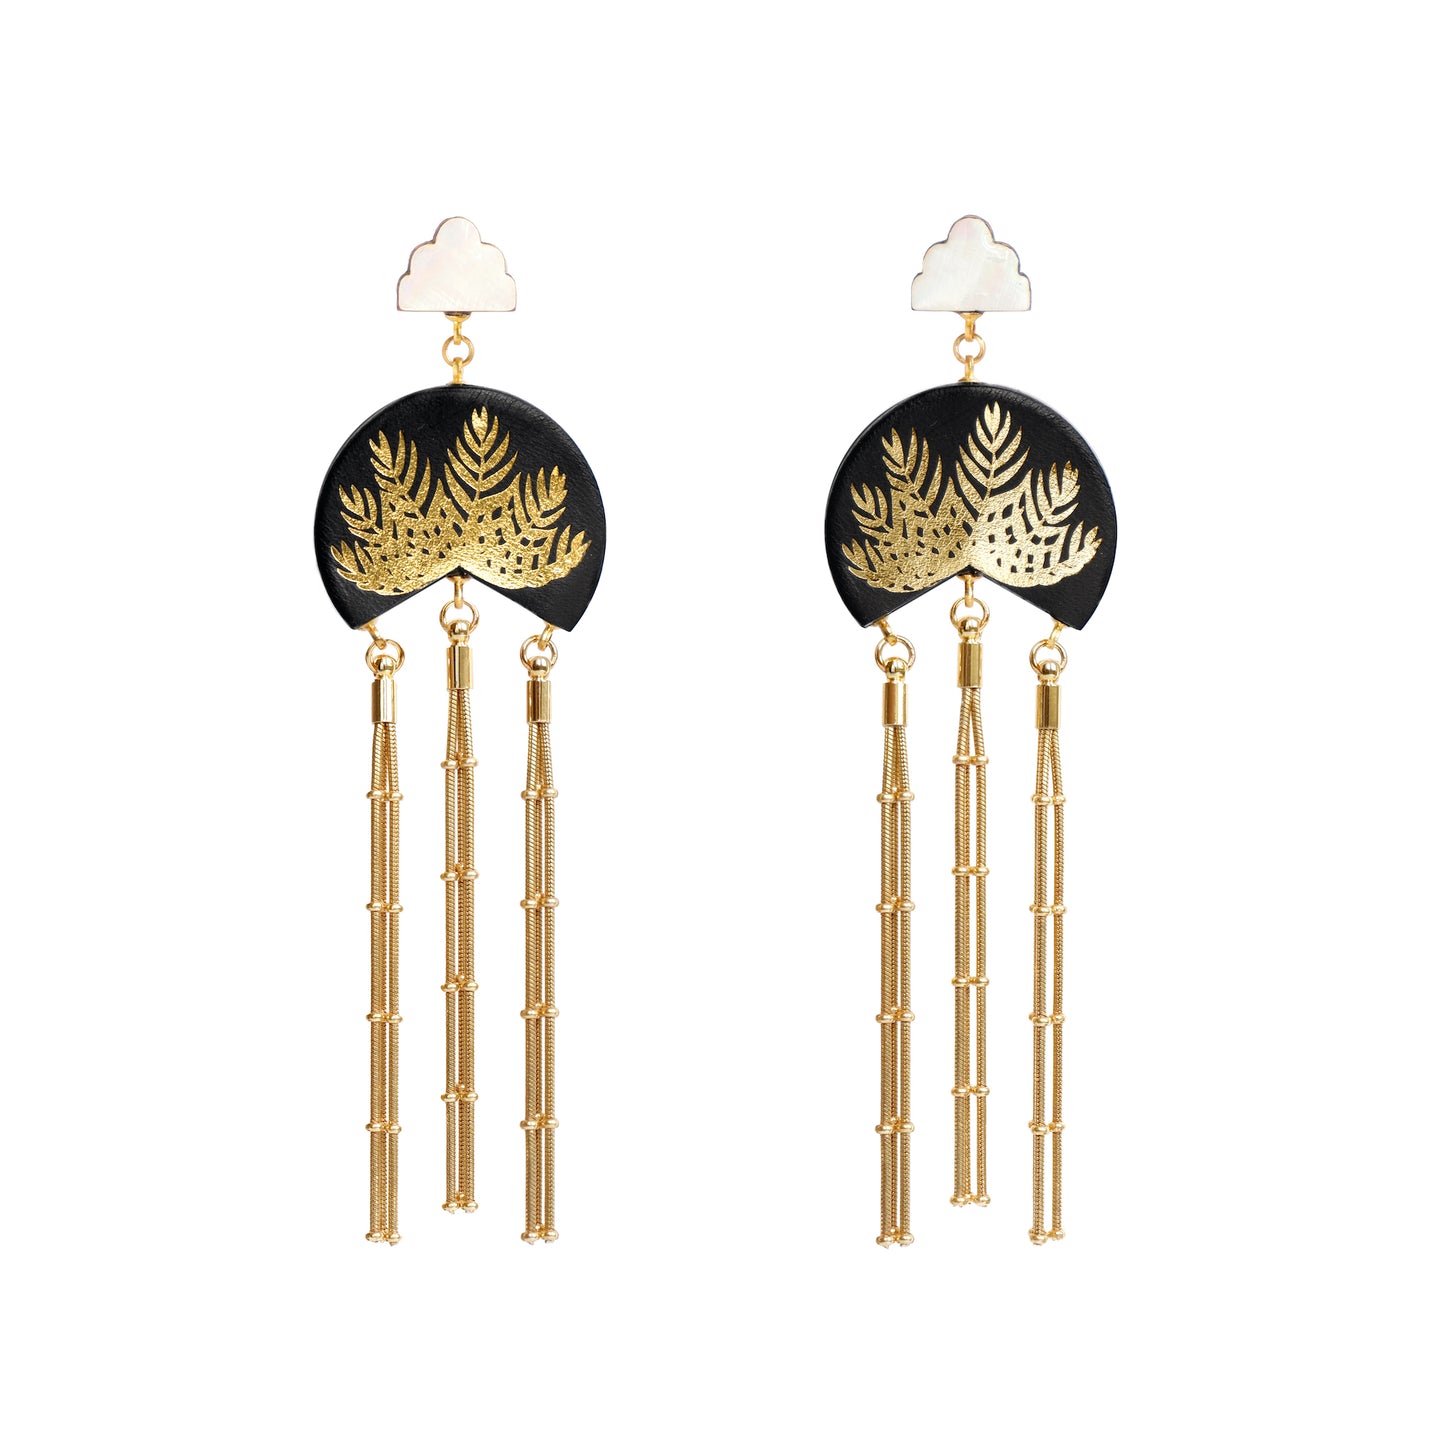 black leather medallion earrings, with gold palm tree print, gold tassels & mother of pearl cloud shade studs.